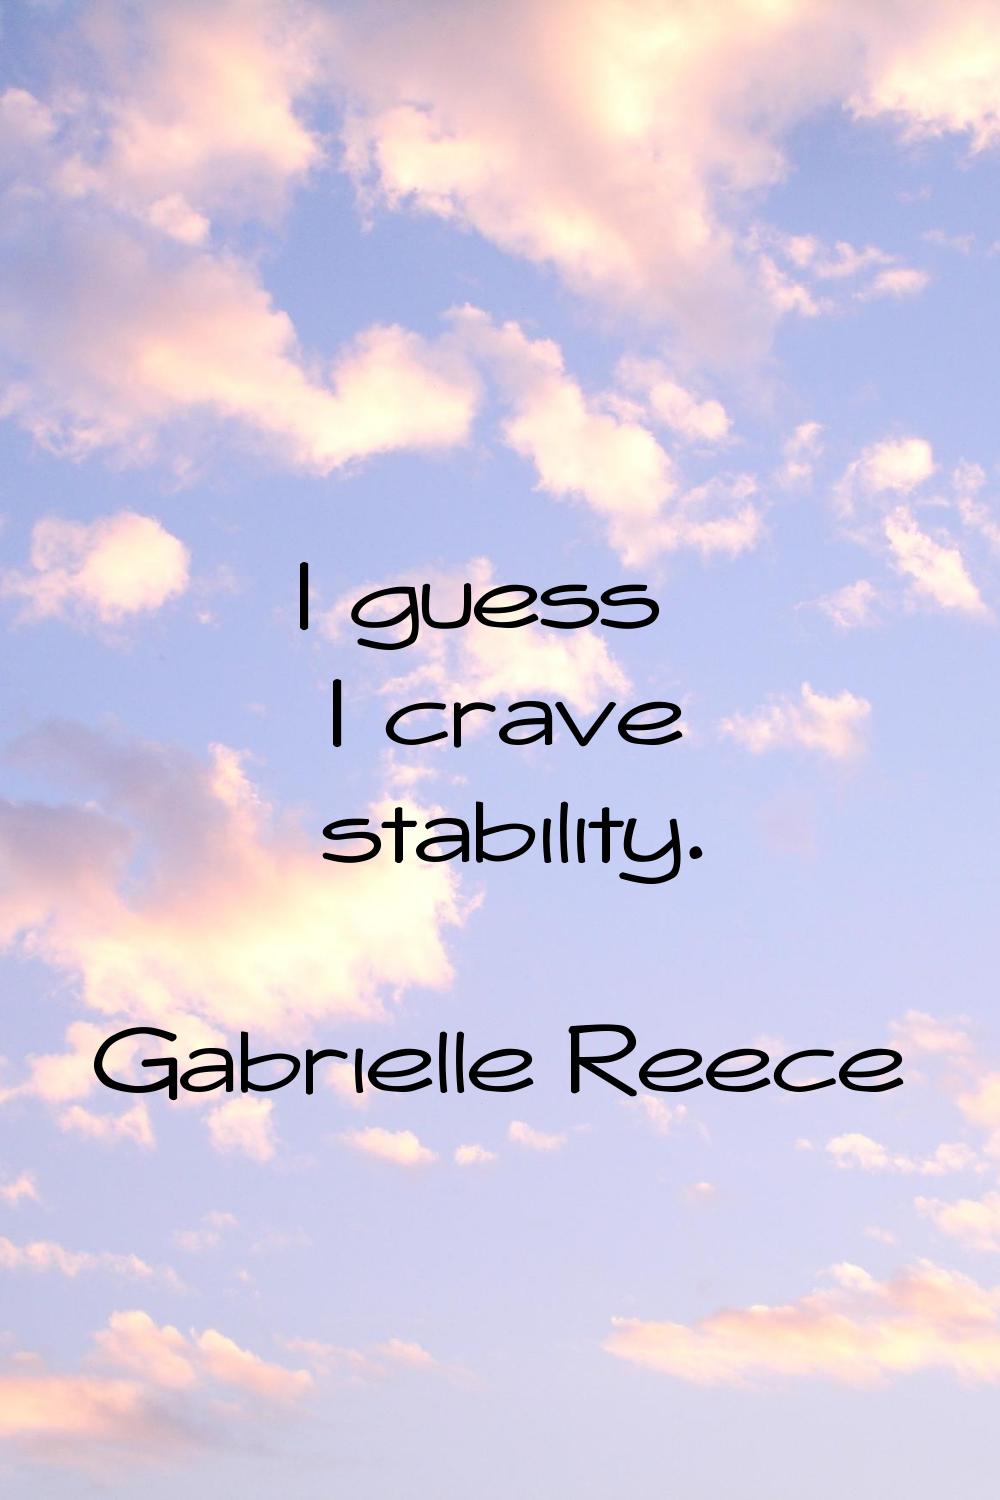 I guess I crave stability.